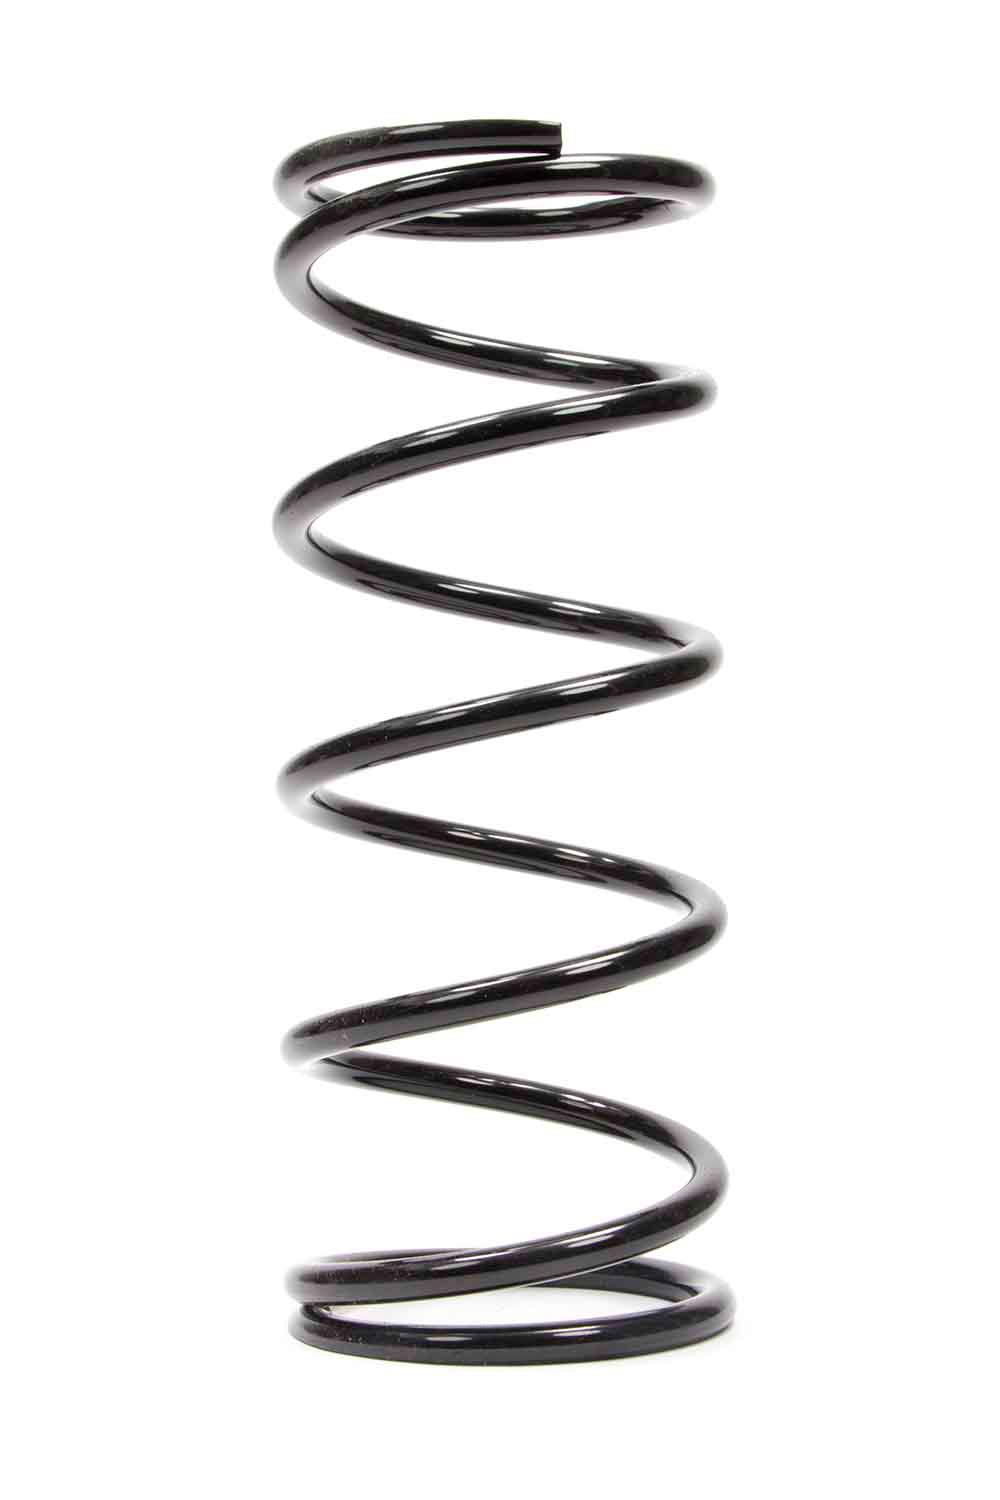 Conv Rear Spring 5in x 13in x 175 - Burlile Performance Products